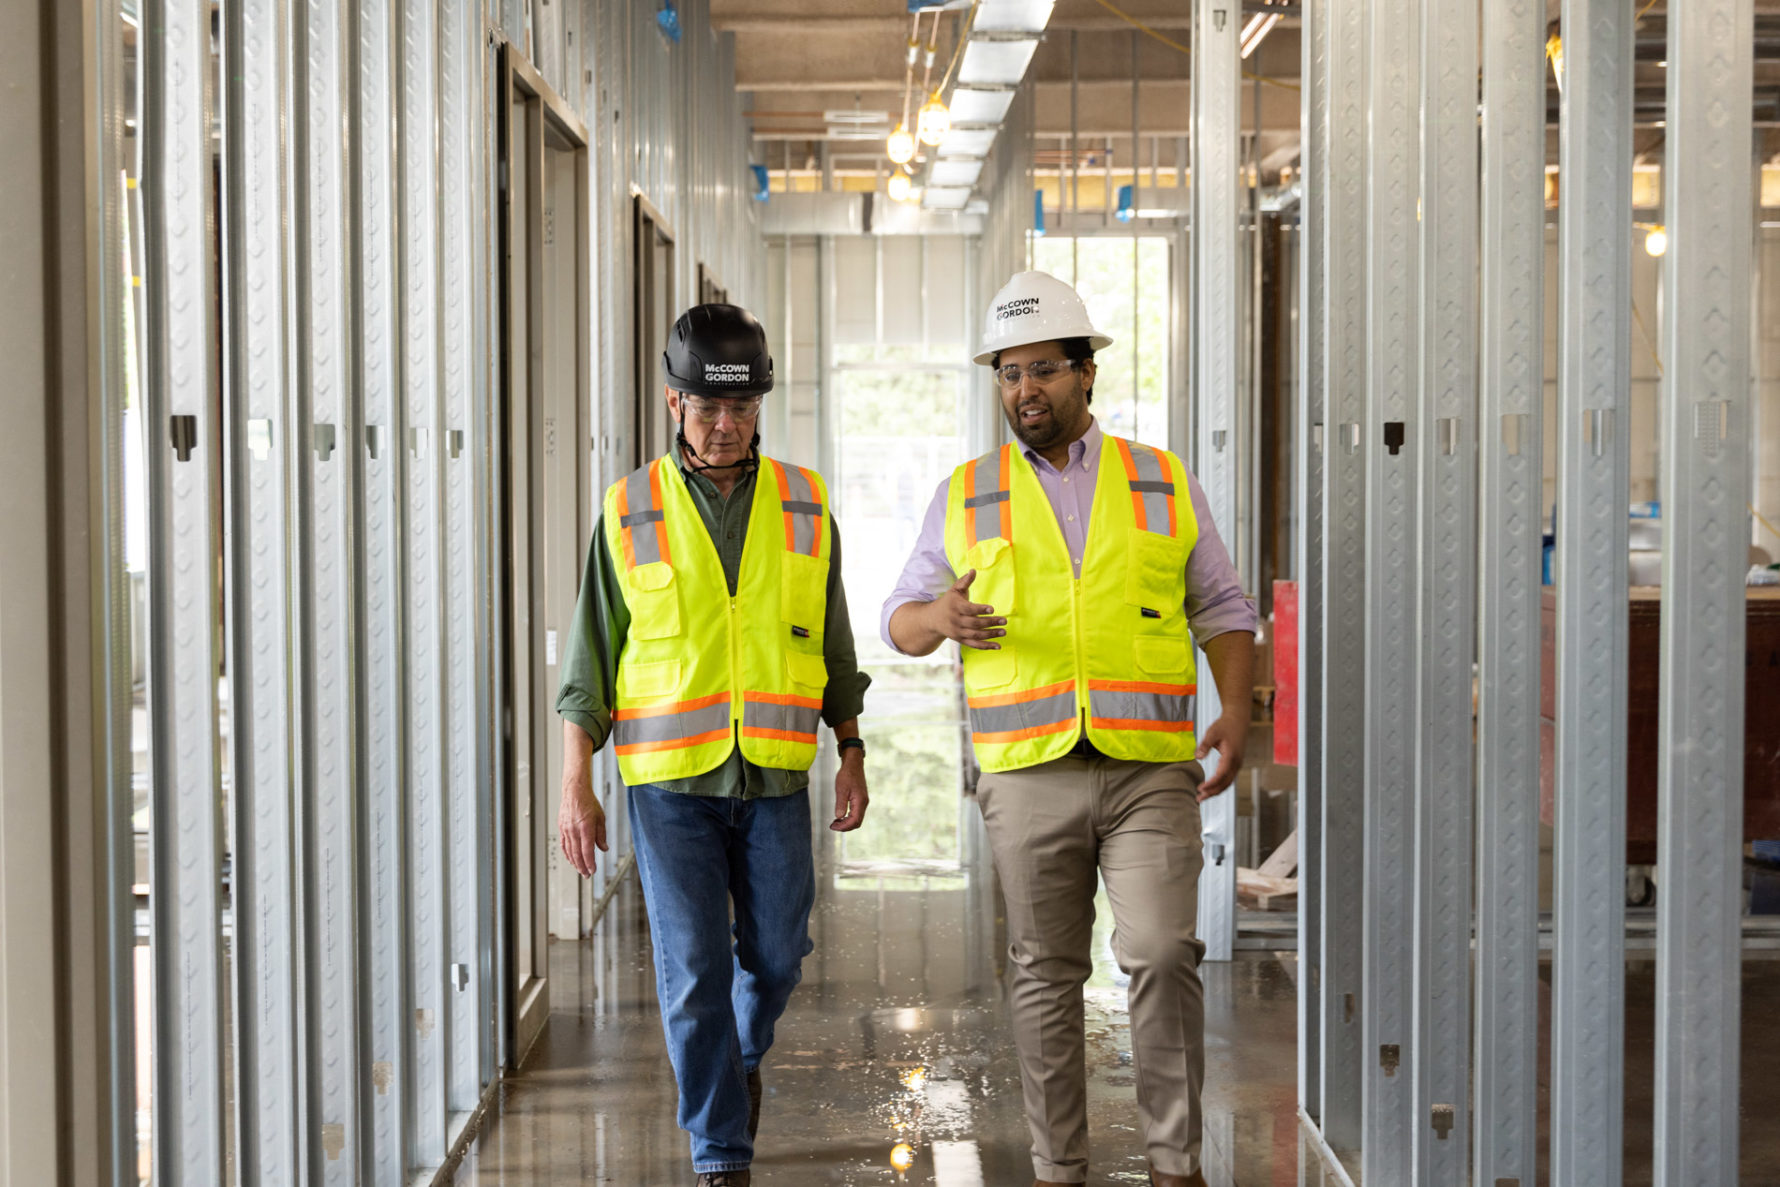 A McCownGordon associate and an owner walking a construction site